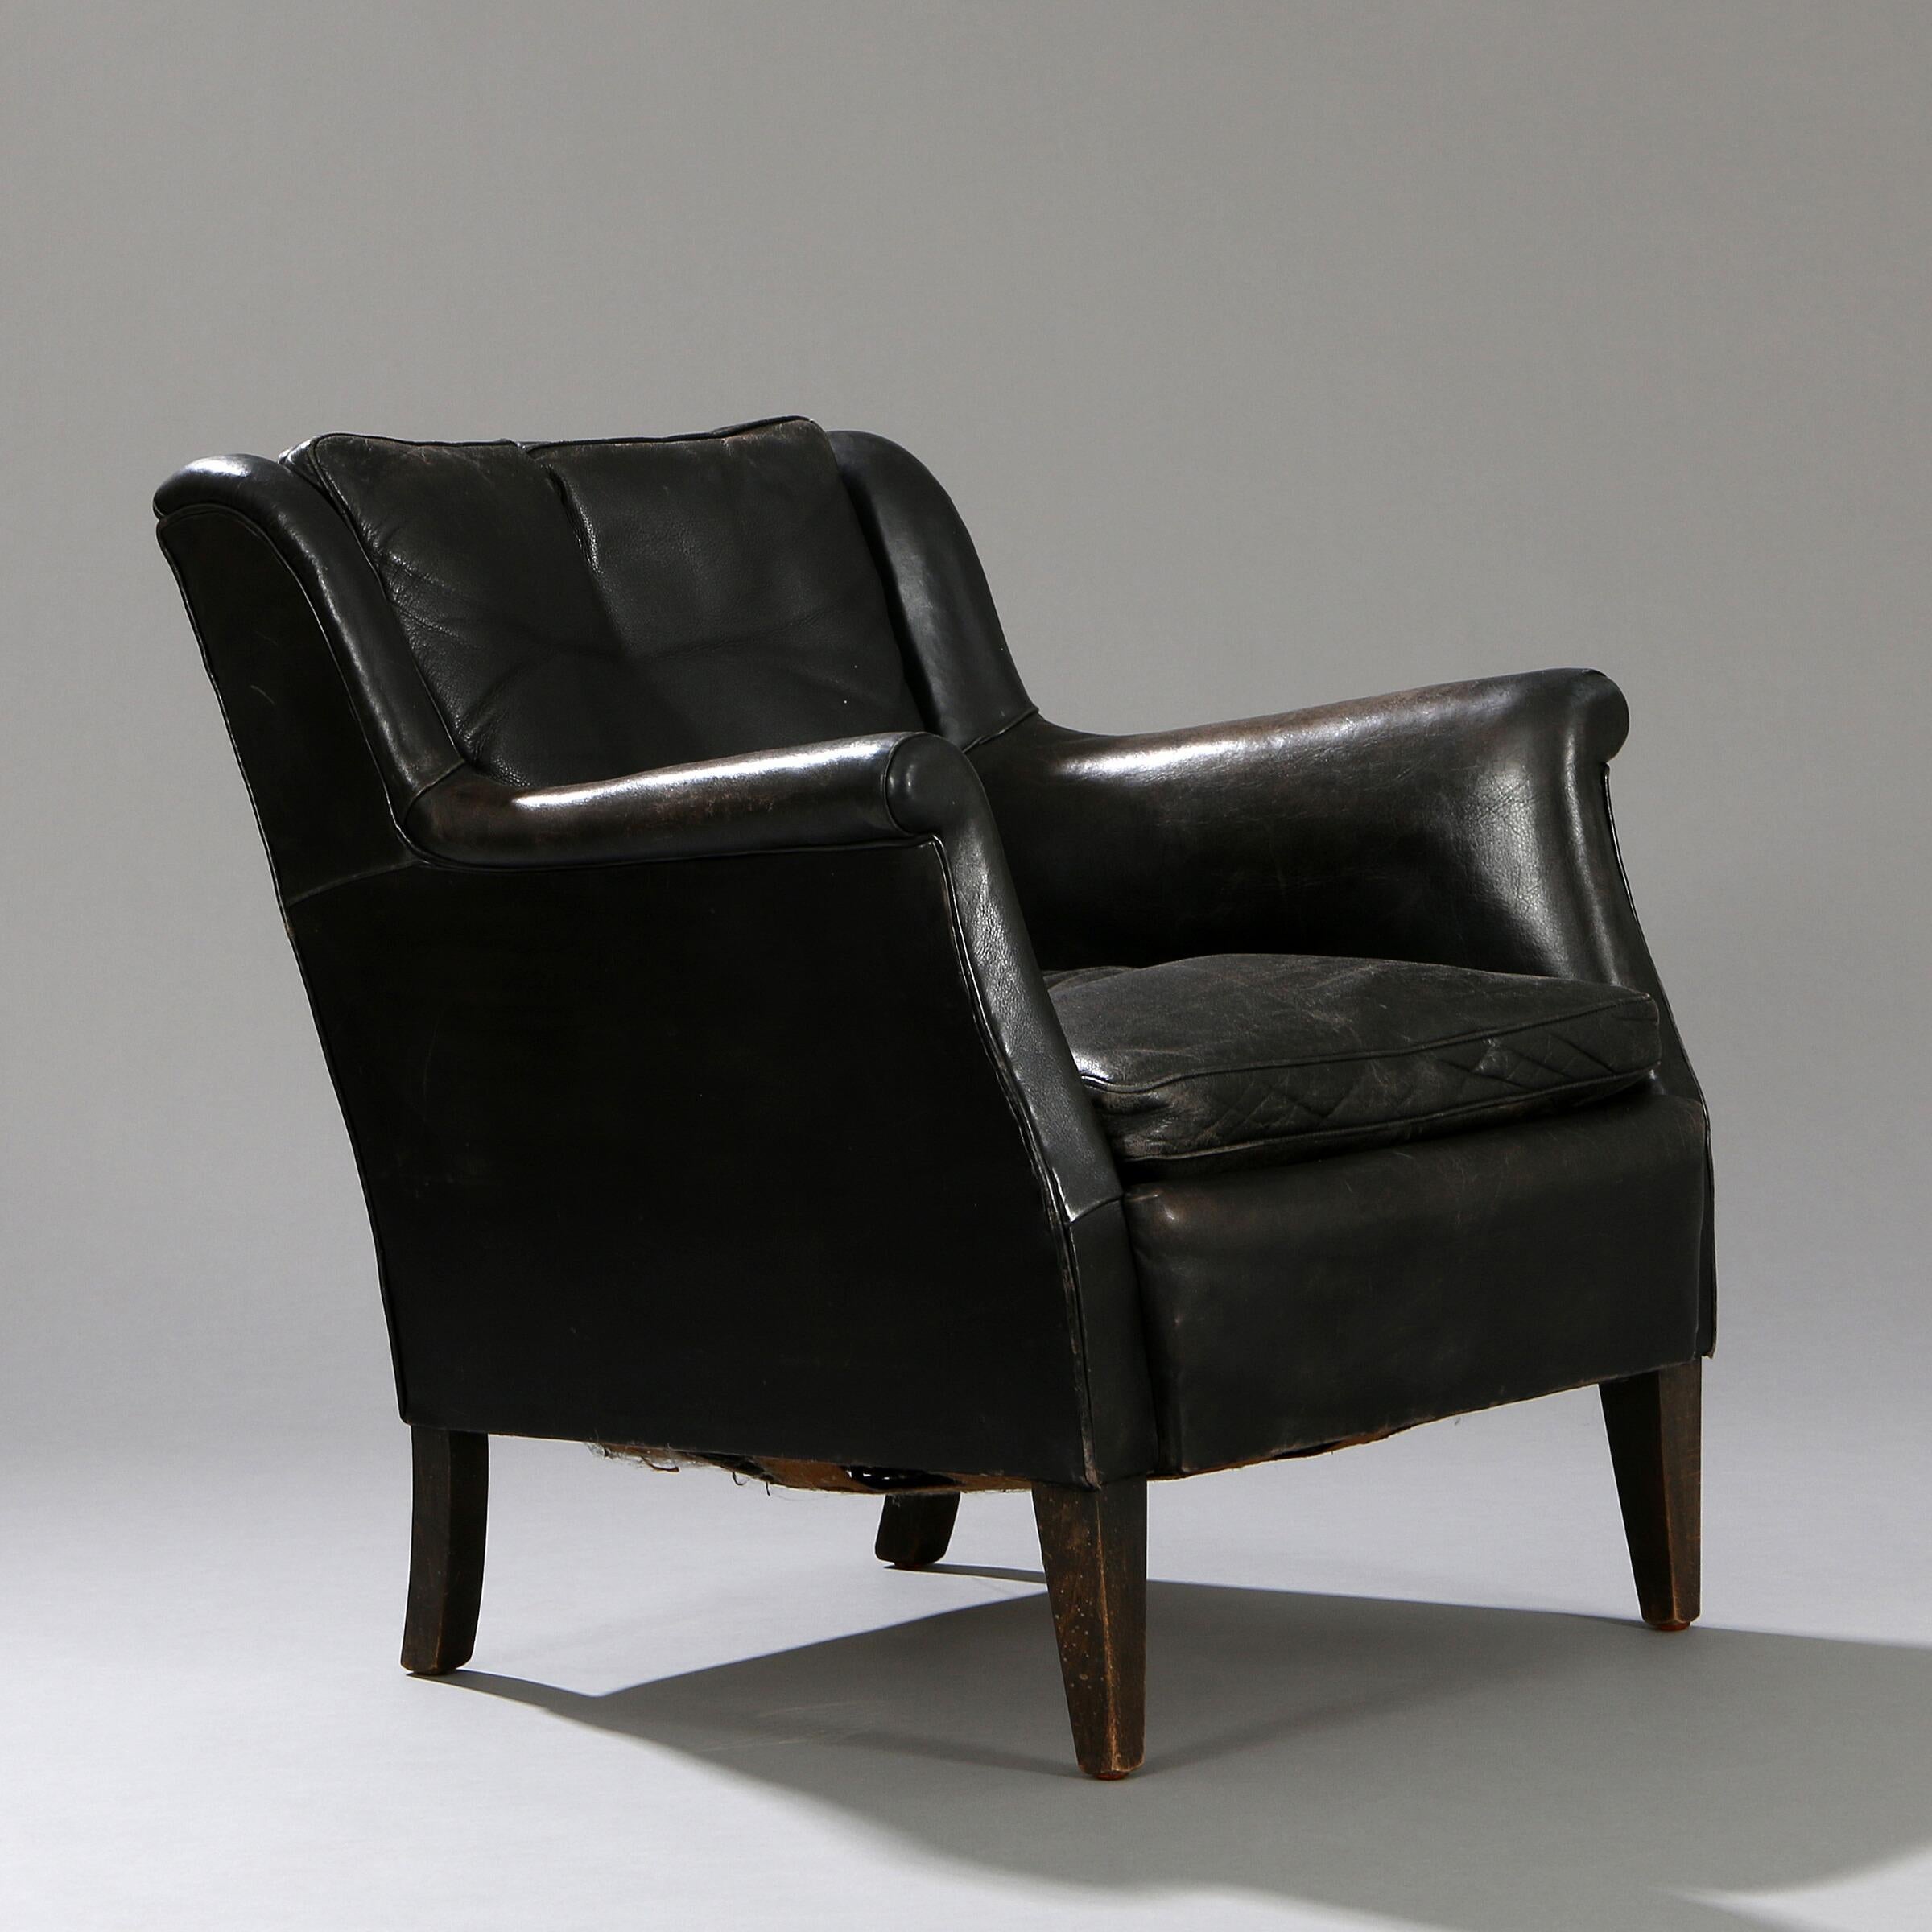 This black leather sofa and armchair were probably made by cabinetmaker Frits Henningsen, circa 1950. The original black leather is well patinated with signs of wear and some cracking to leather. The backrest reclines significantly, making this a